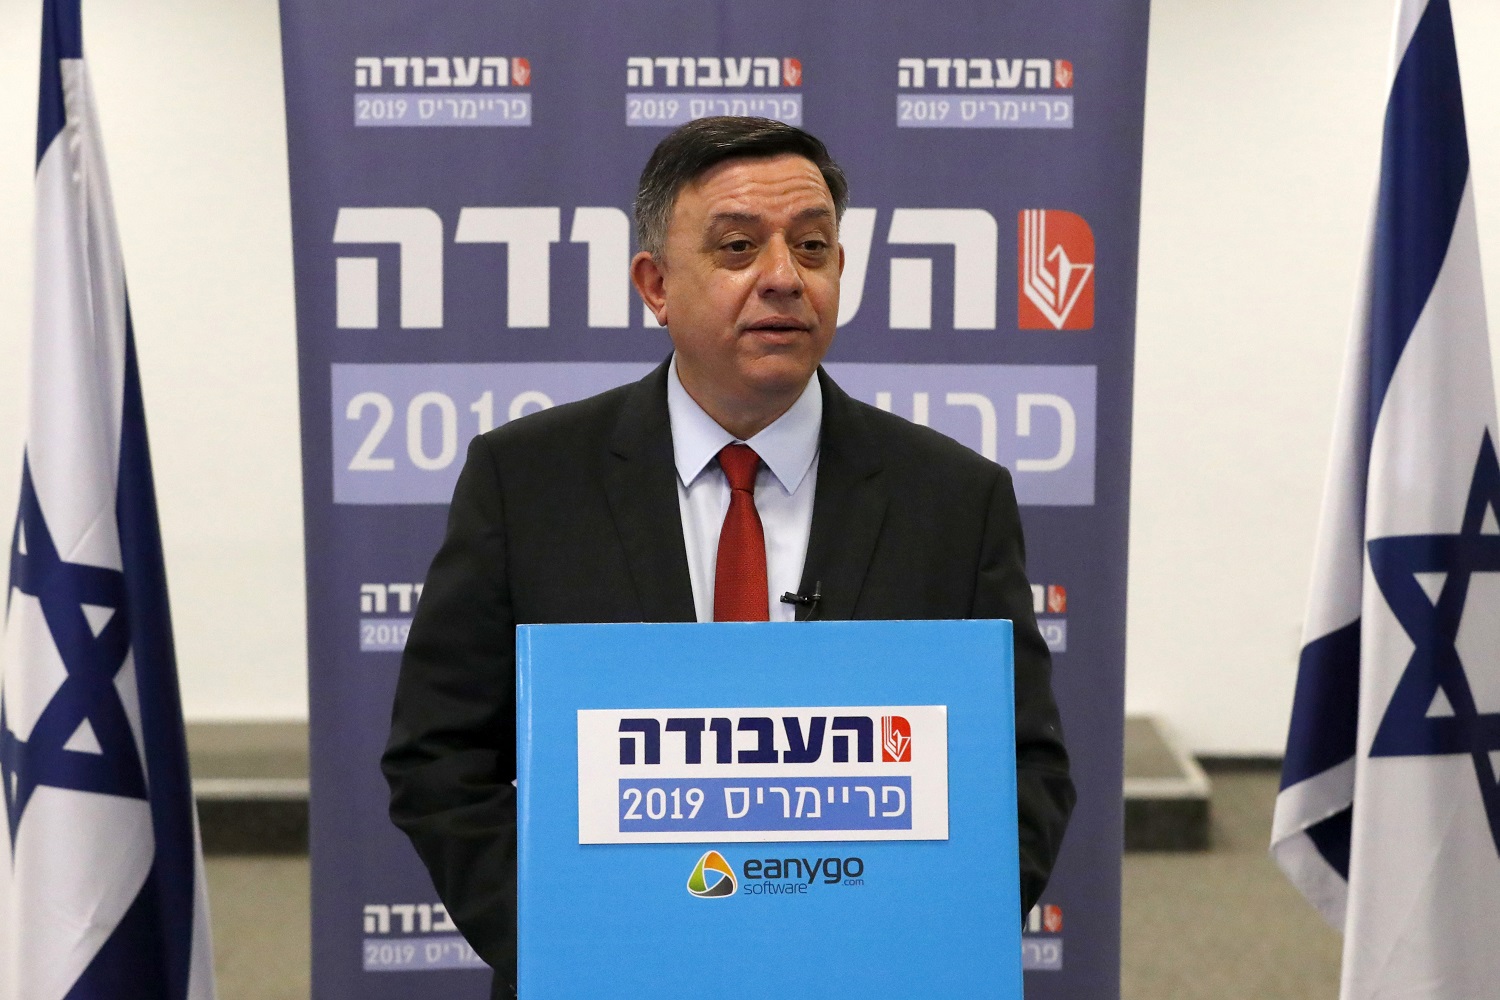 Avi Gabbay, Labor Party chairman, casts his vote during his party's primaries in Tel Aviv in February 2019 (AFP)